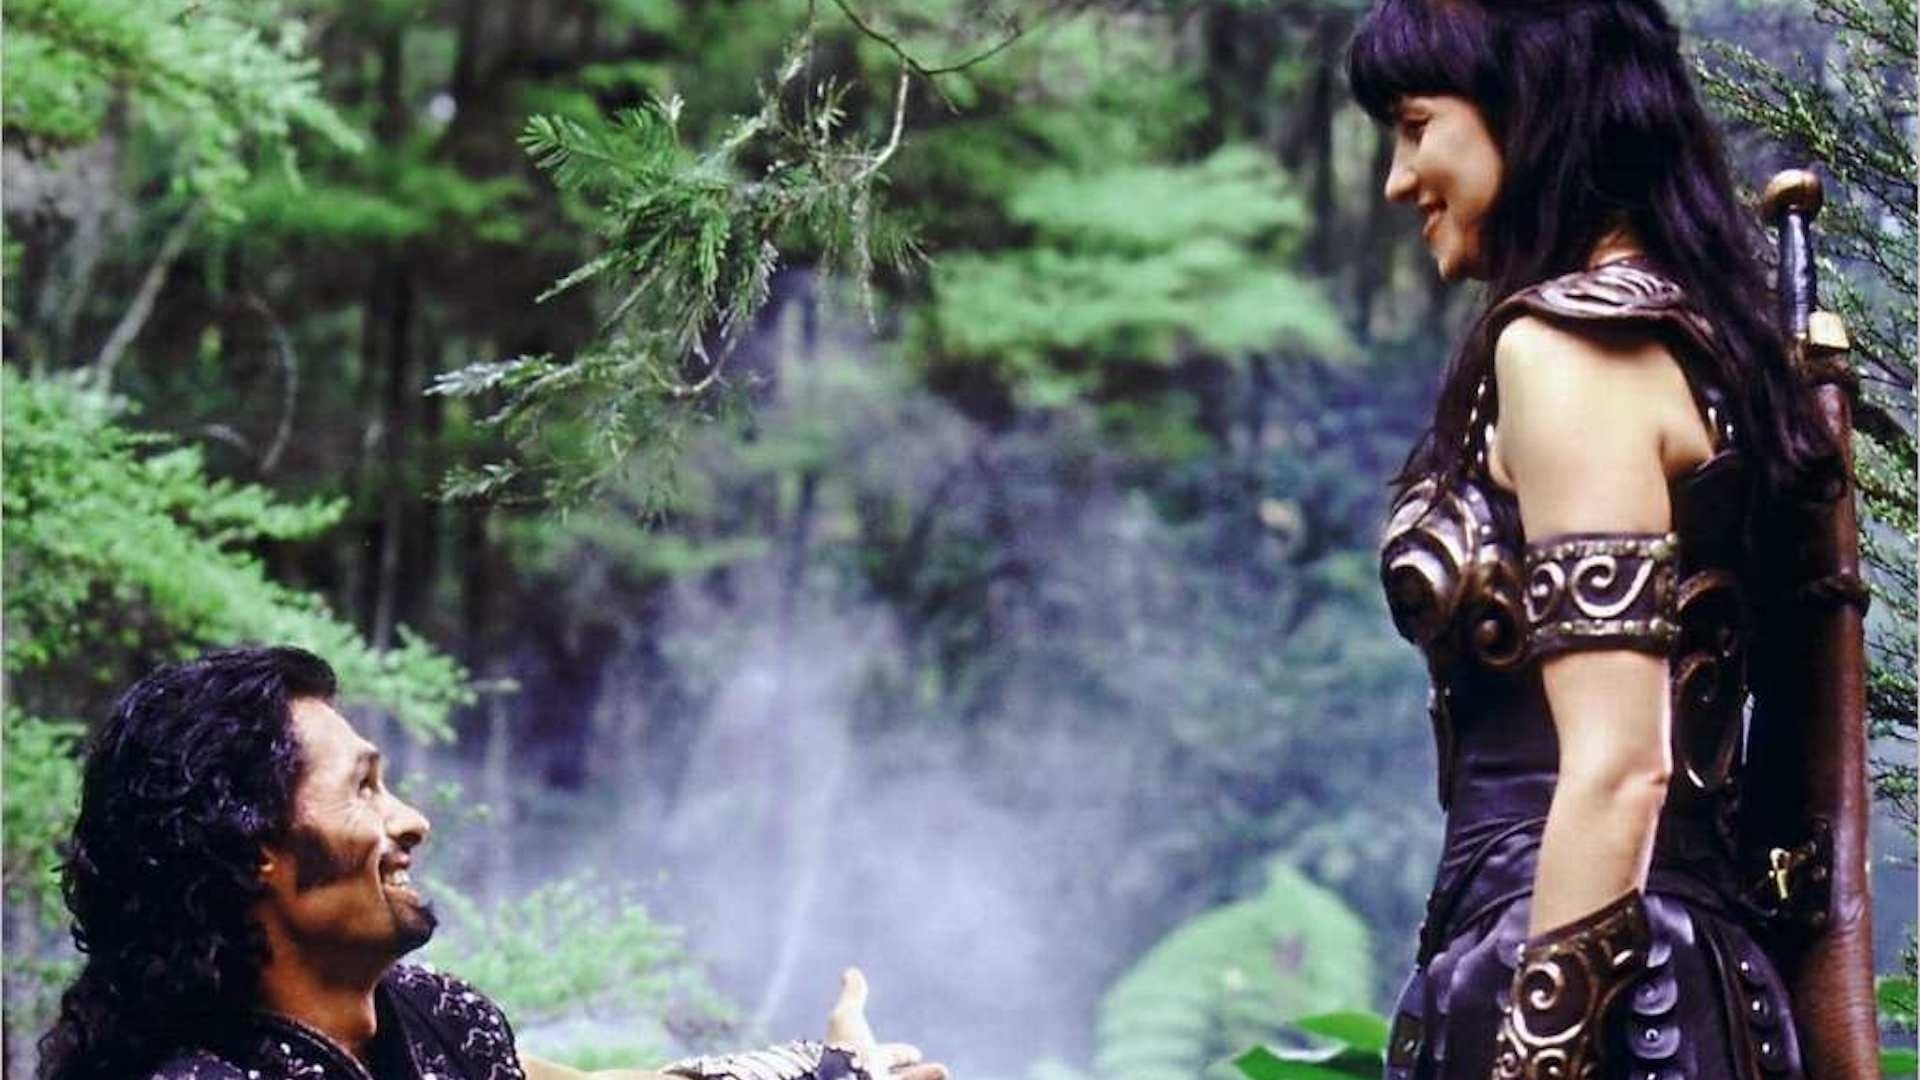 Xena: Warrior Princess (TV Series): Lucy Lawless, A New Zealand actress who played the main role in a popular show. 1920x1080 Full HD Background.